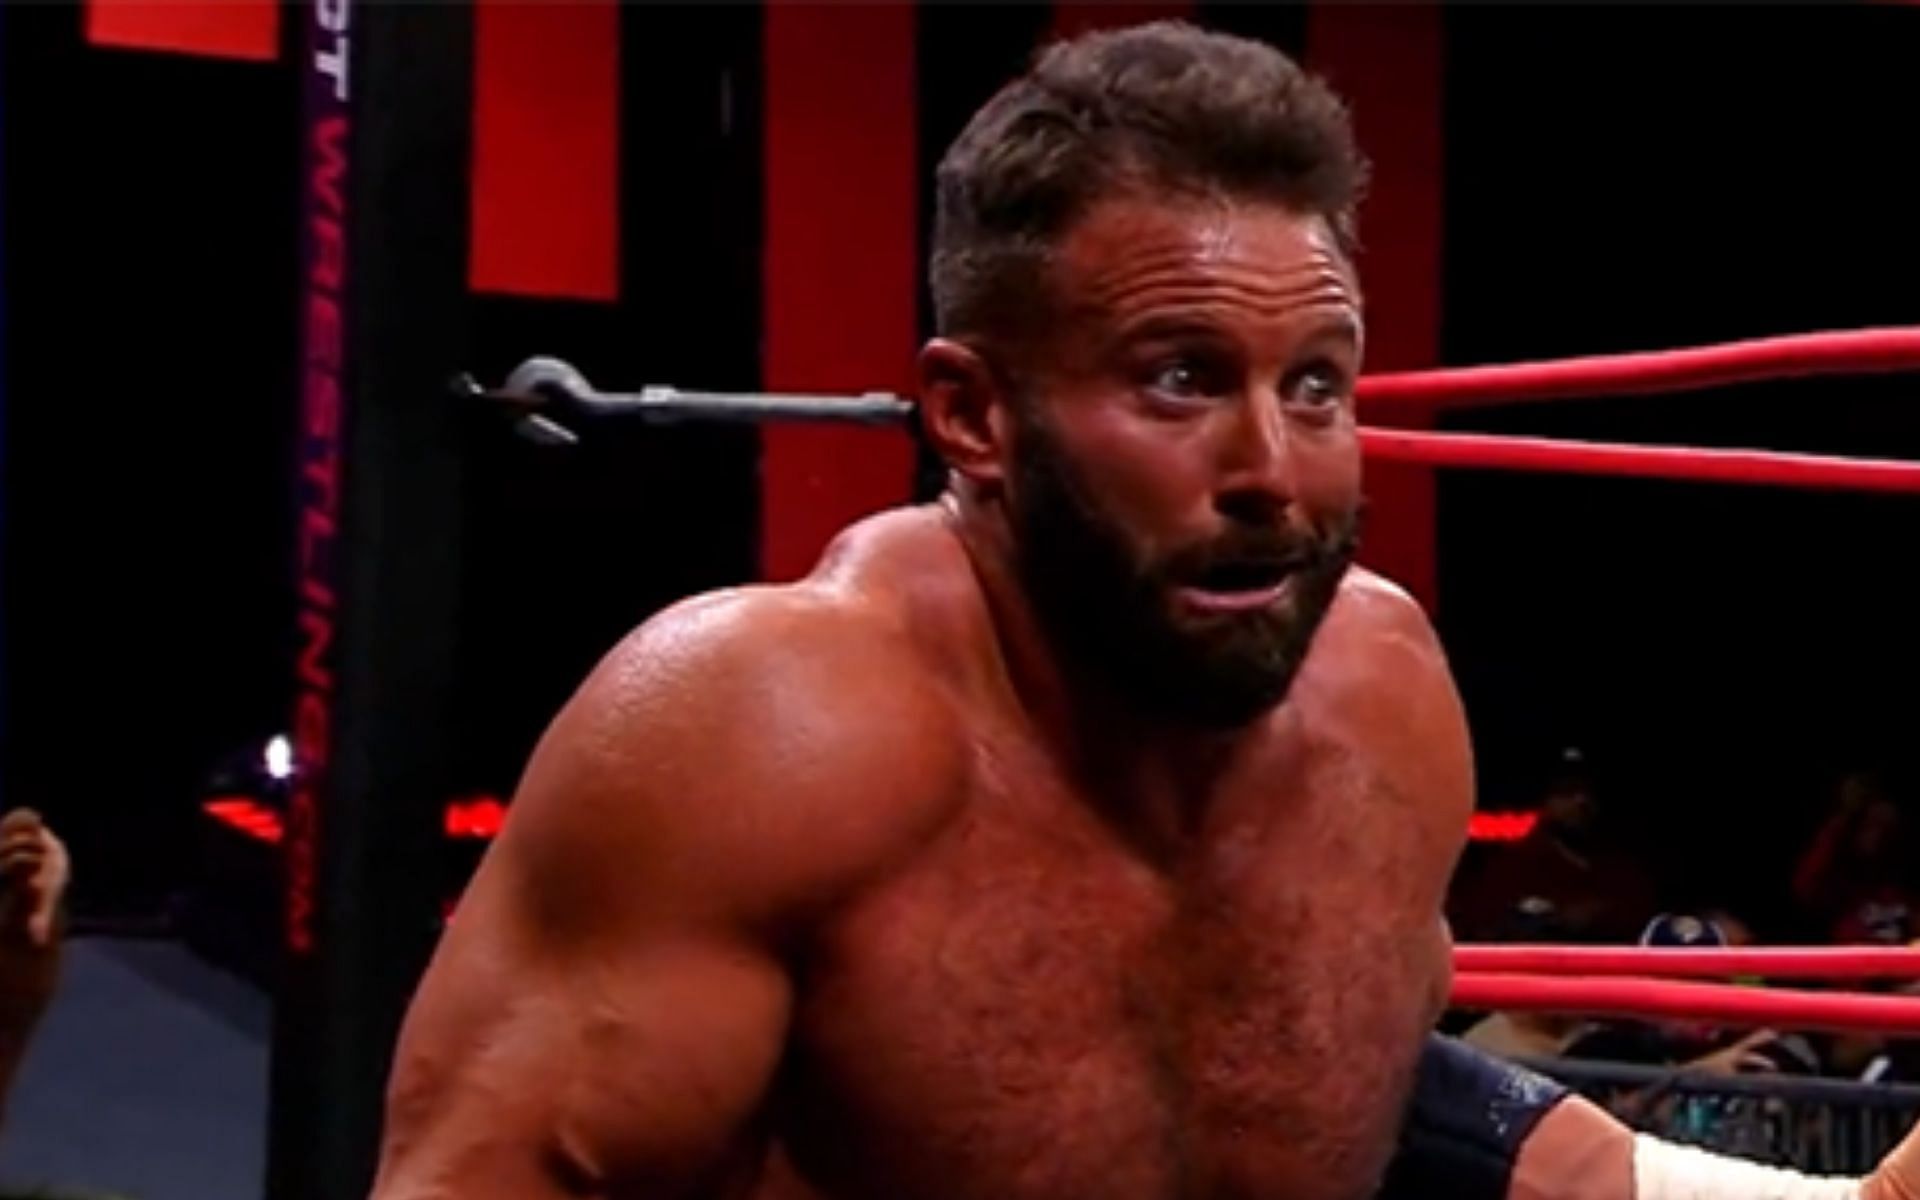 The man formerly known as Zack Ryder has made waves on the indies